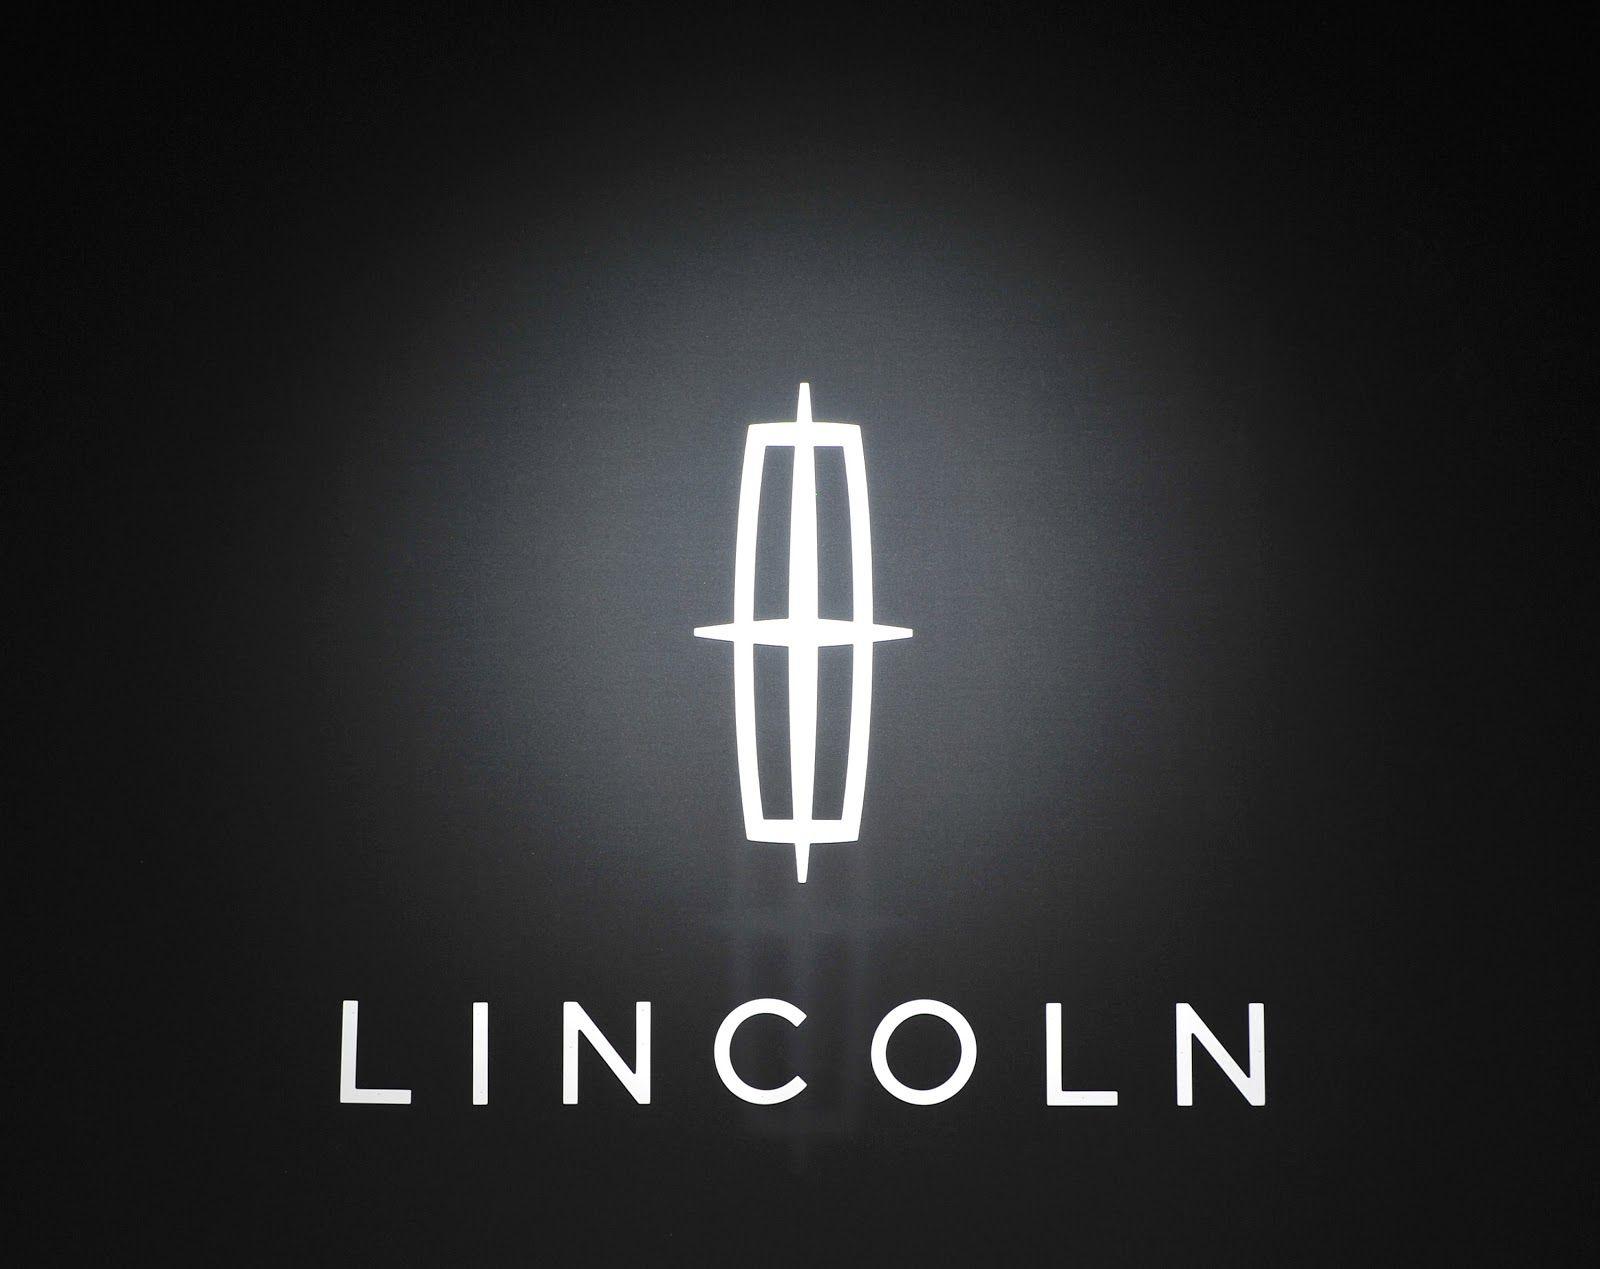 Lincoln Logo - Lincoln Logo, Lincoln Car Symbol Meaning and History | Car Brand ...